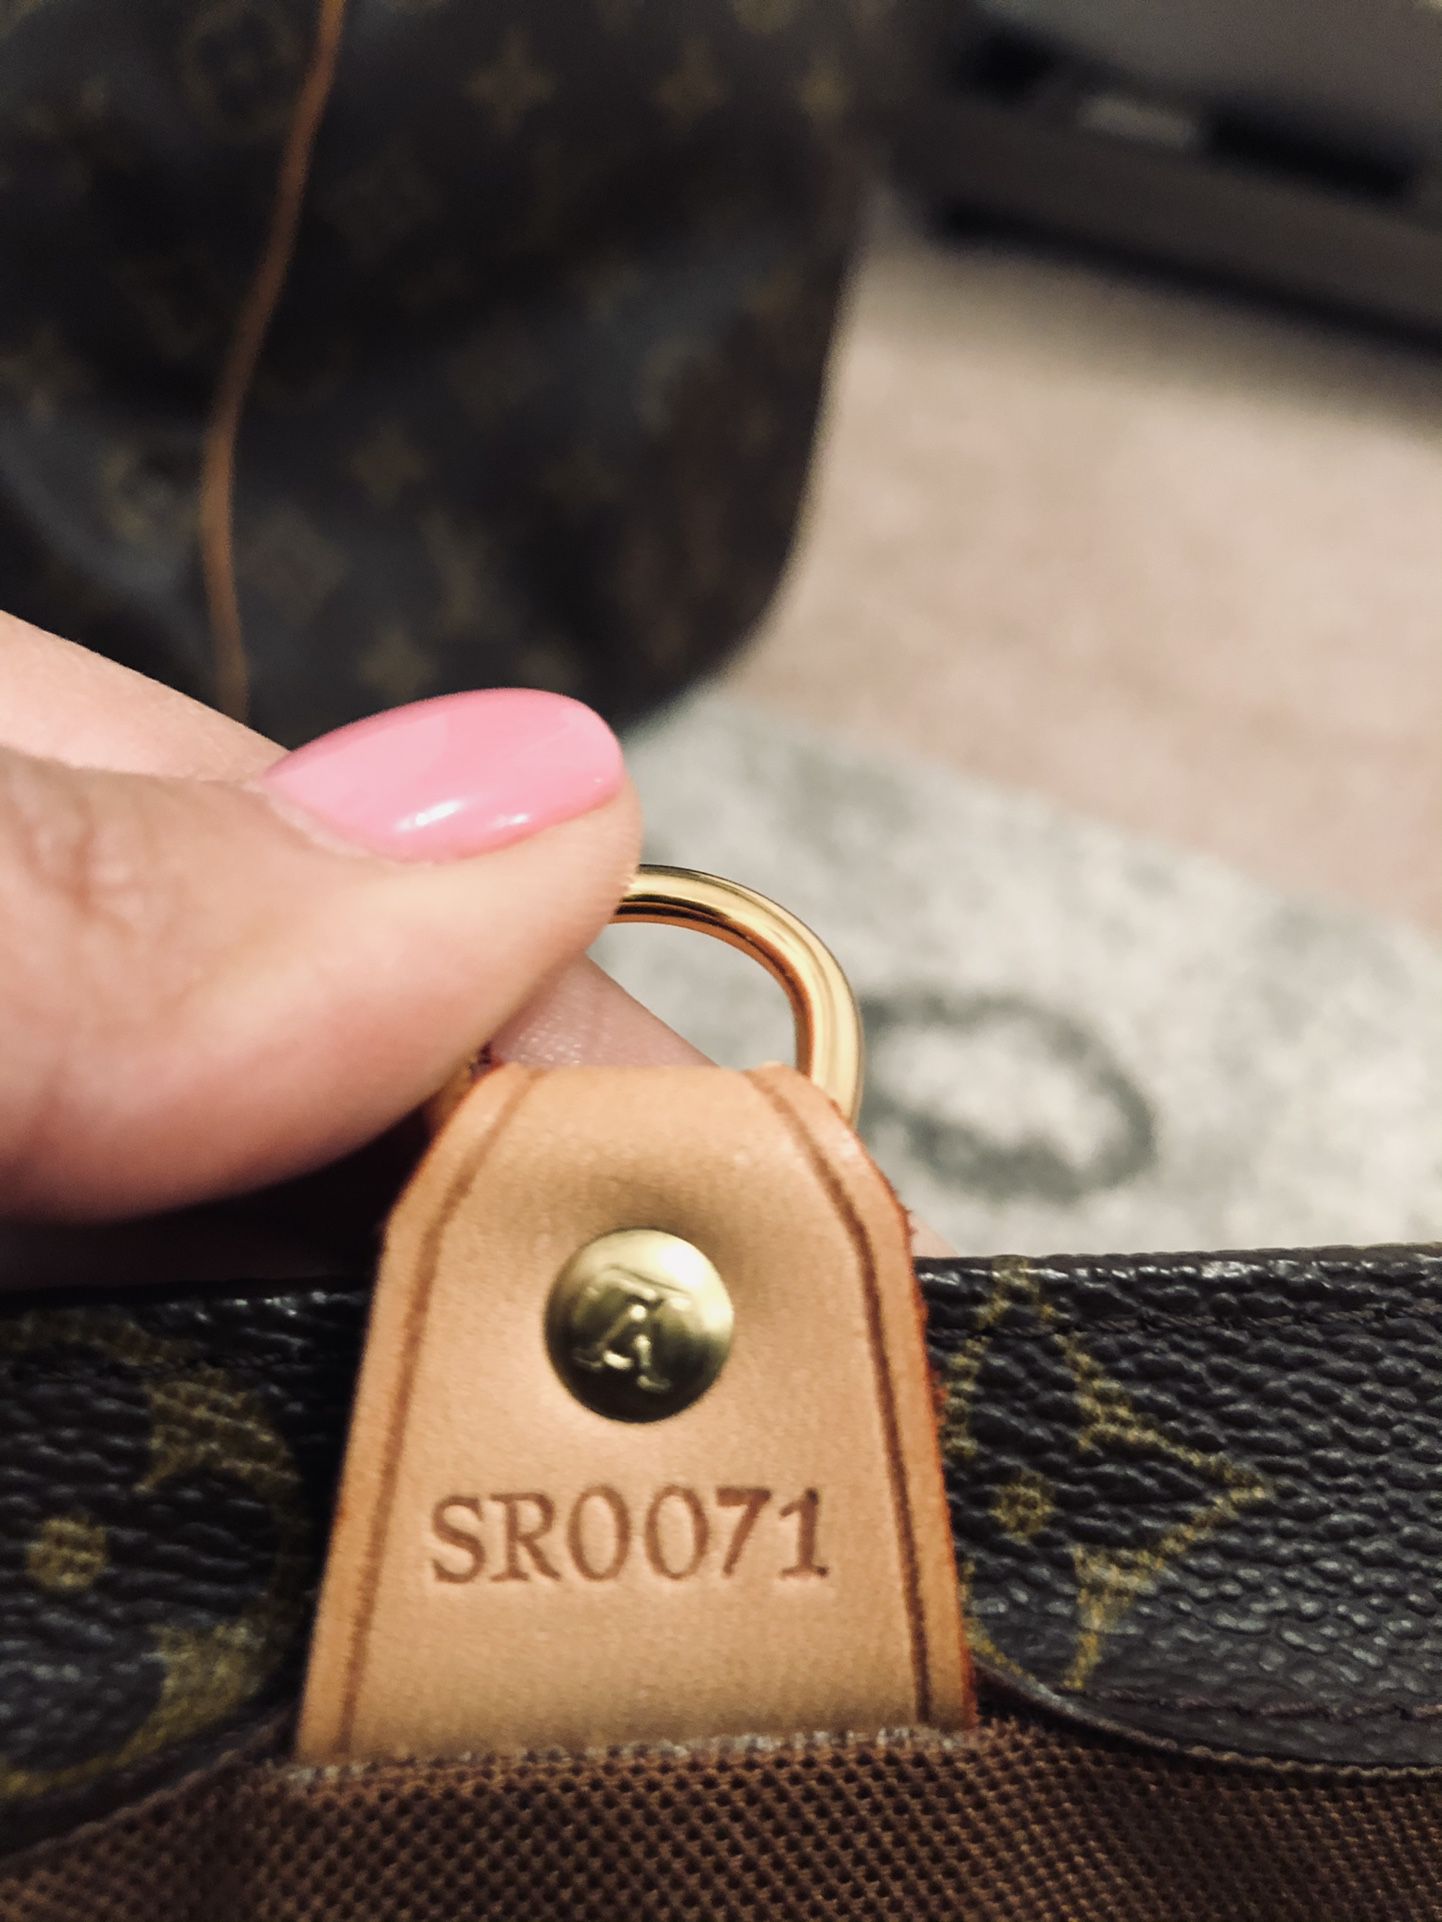 Authentic revamped Louis Vuitton Neverfull MM Monogram for Sale in Odessa,  TX - OfferUp